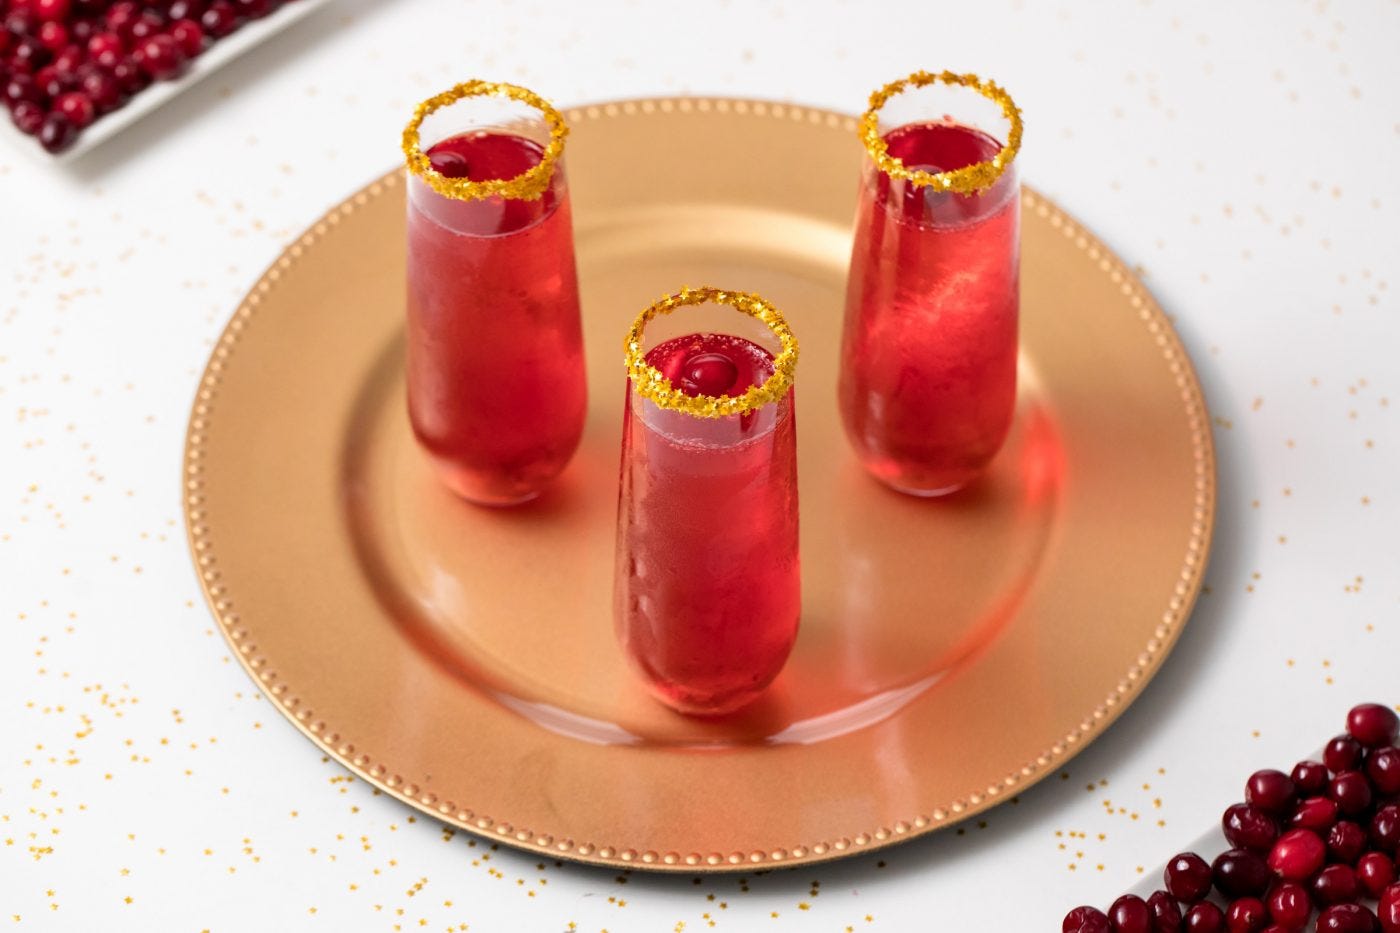 Champagne Jell-O shots are perfect for a New Year's Eve celebration